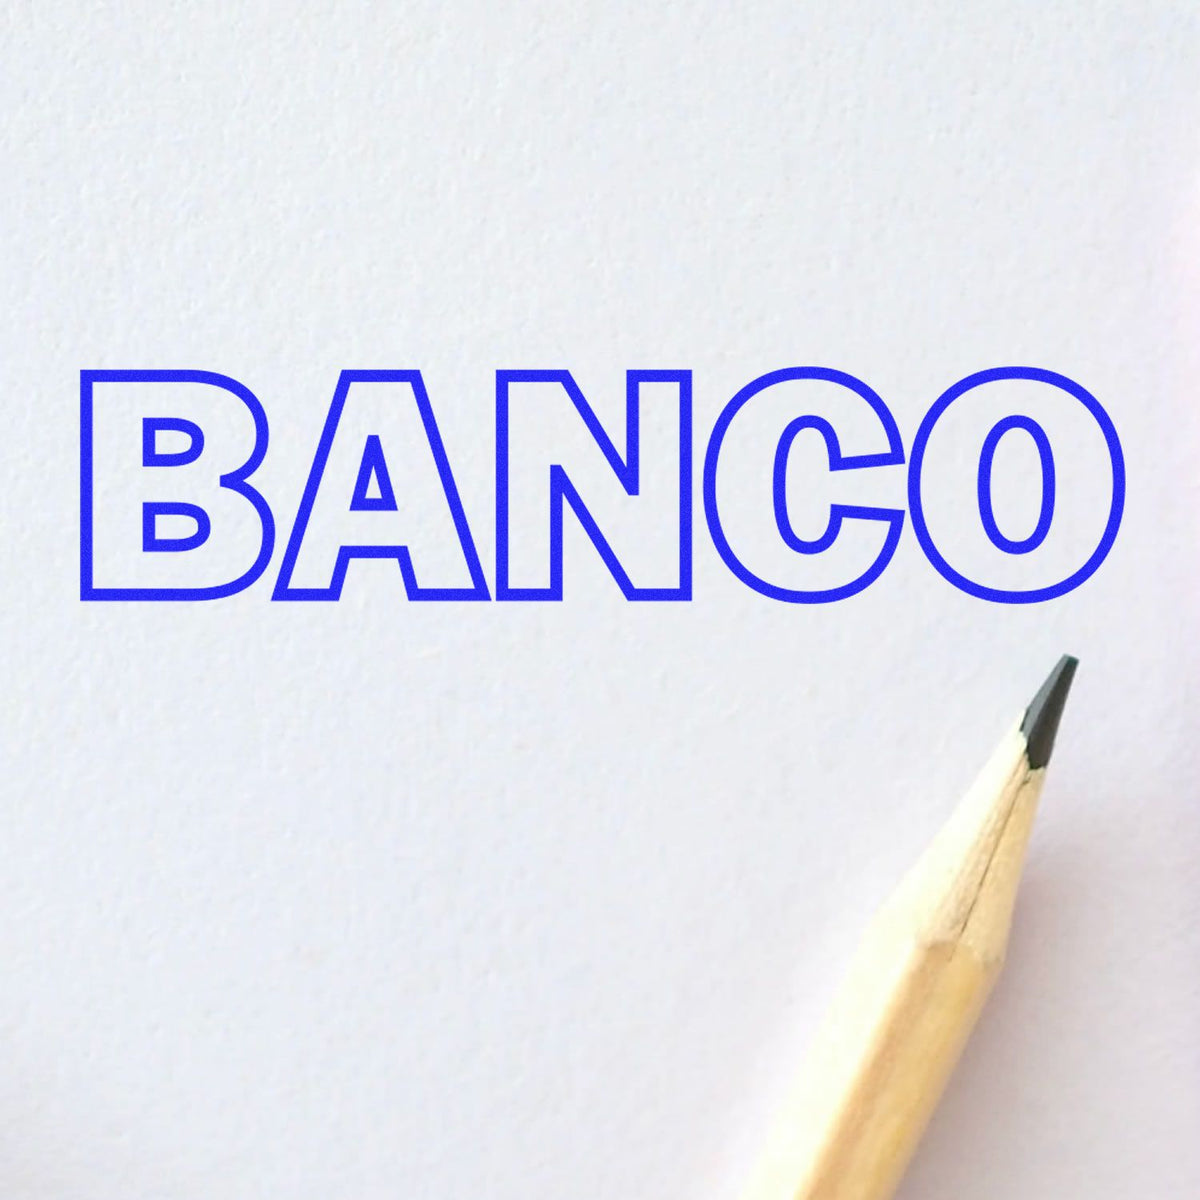 Large Self-Inking Banco Stamp In Use Photo